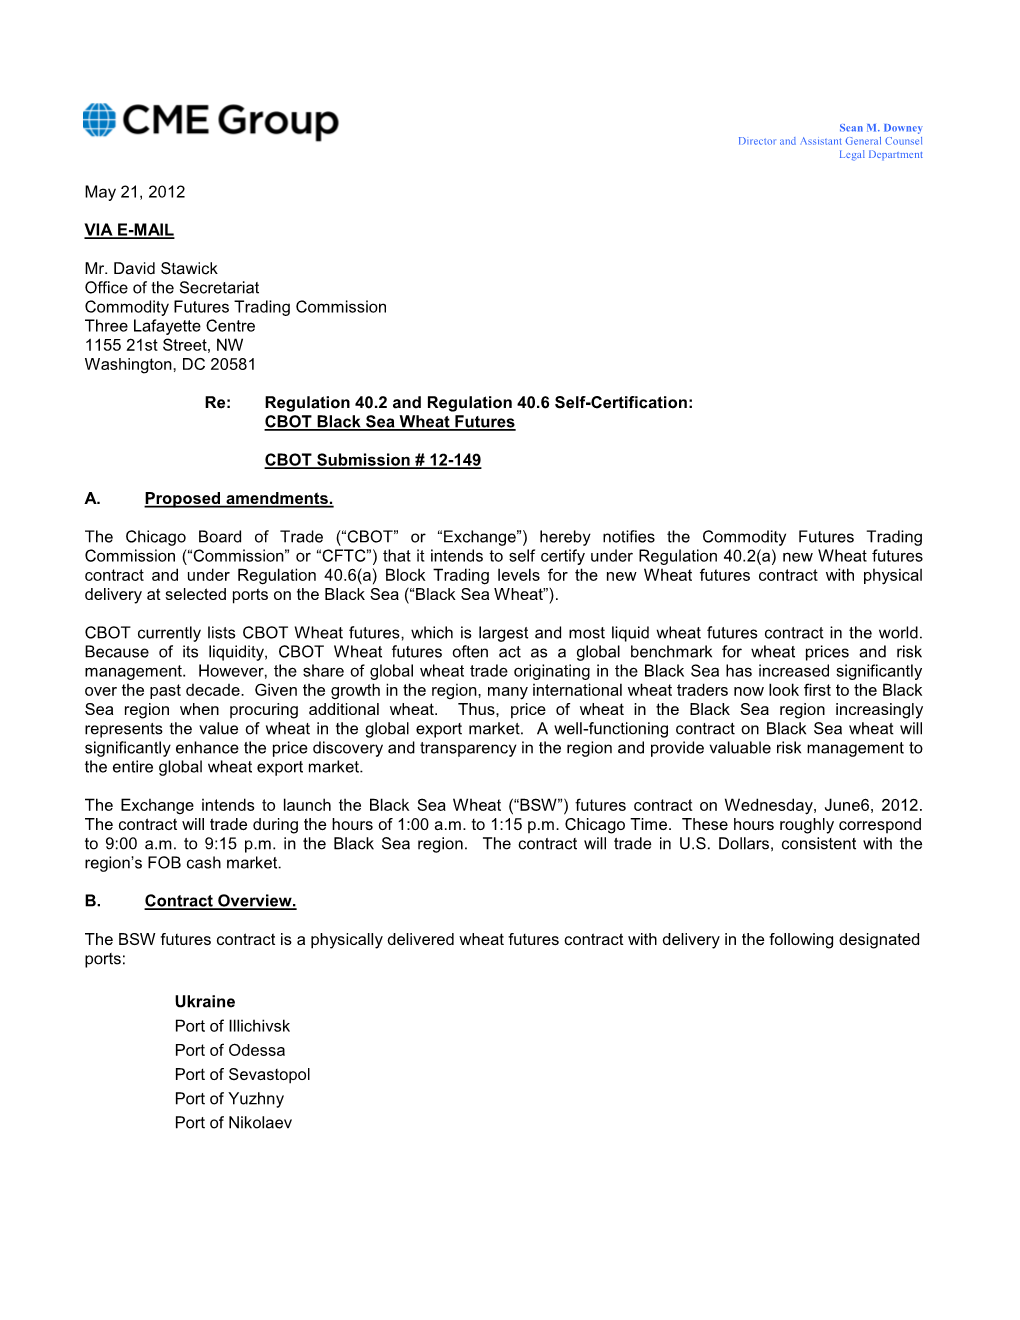 Chicago Board of Trade Rule Submission, May 21, 2012